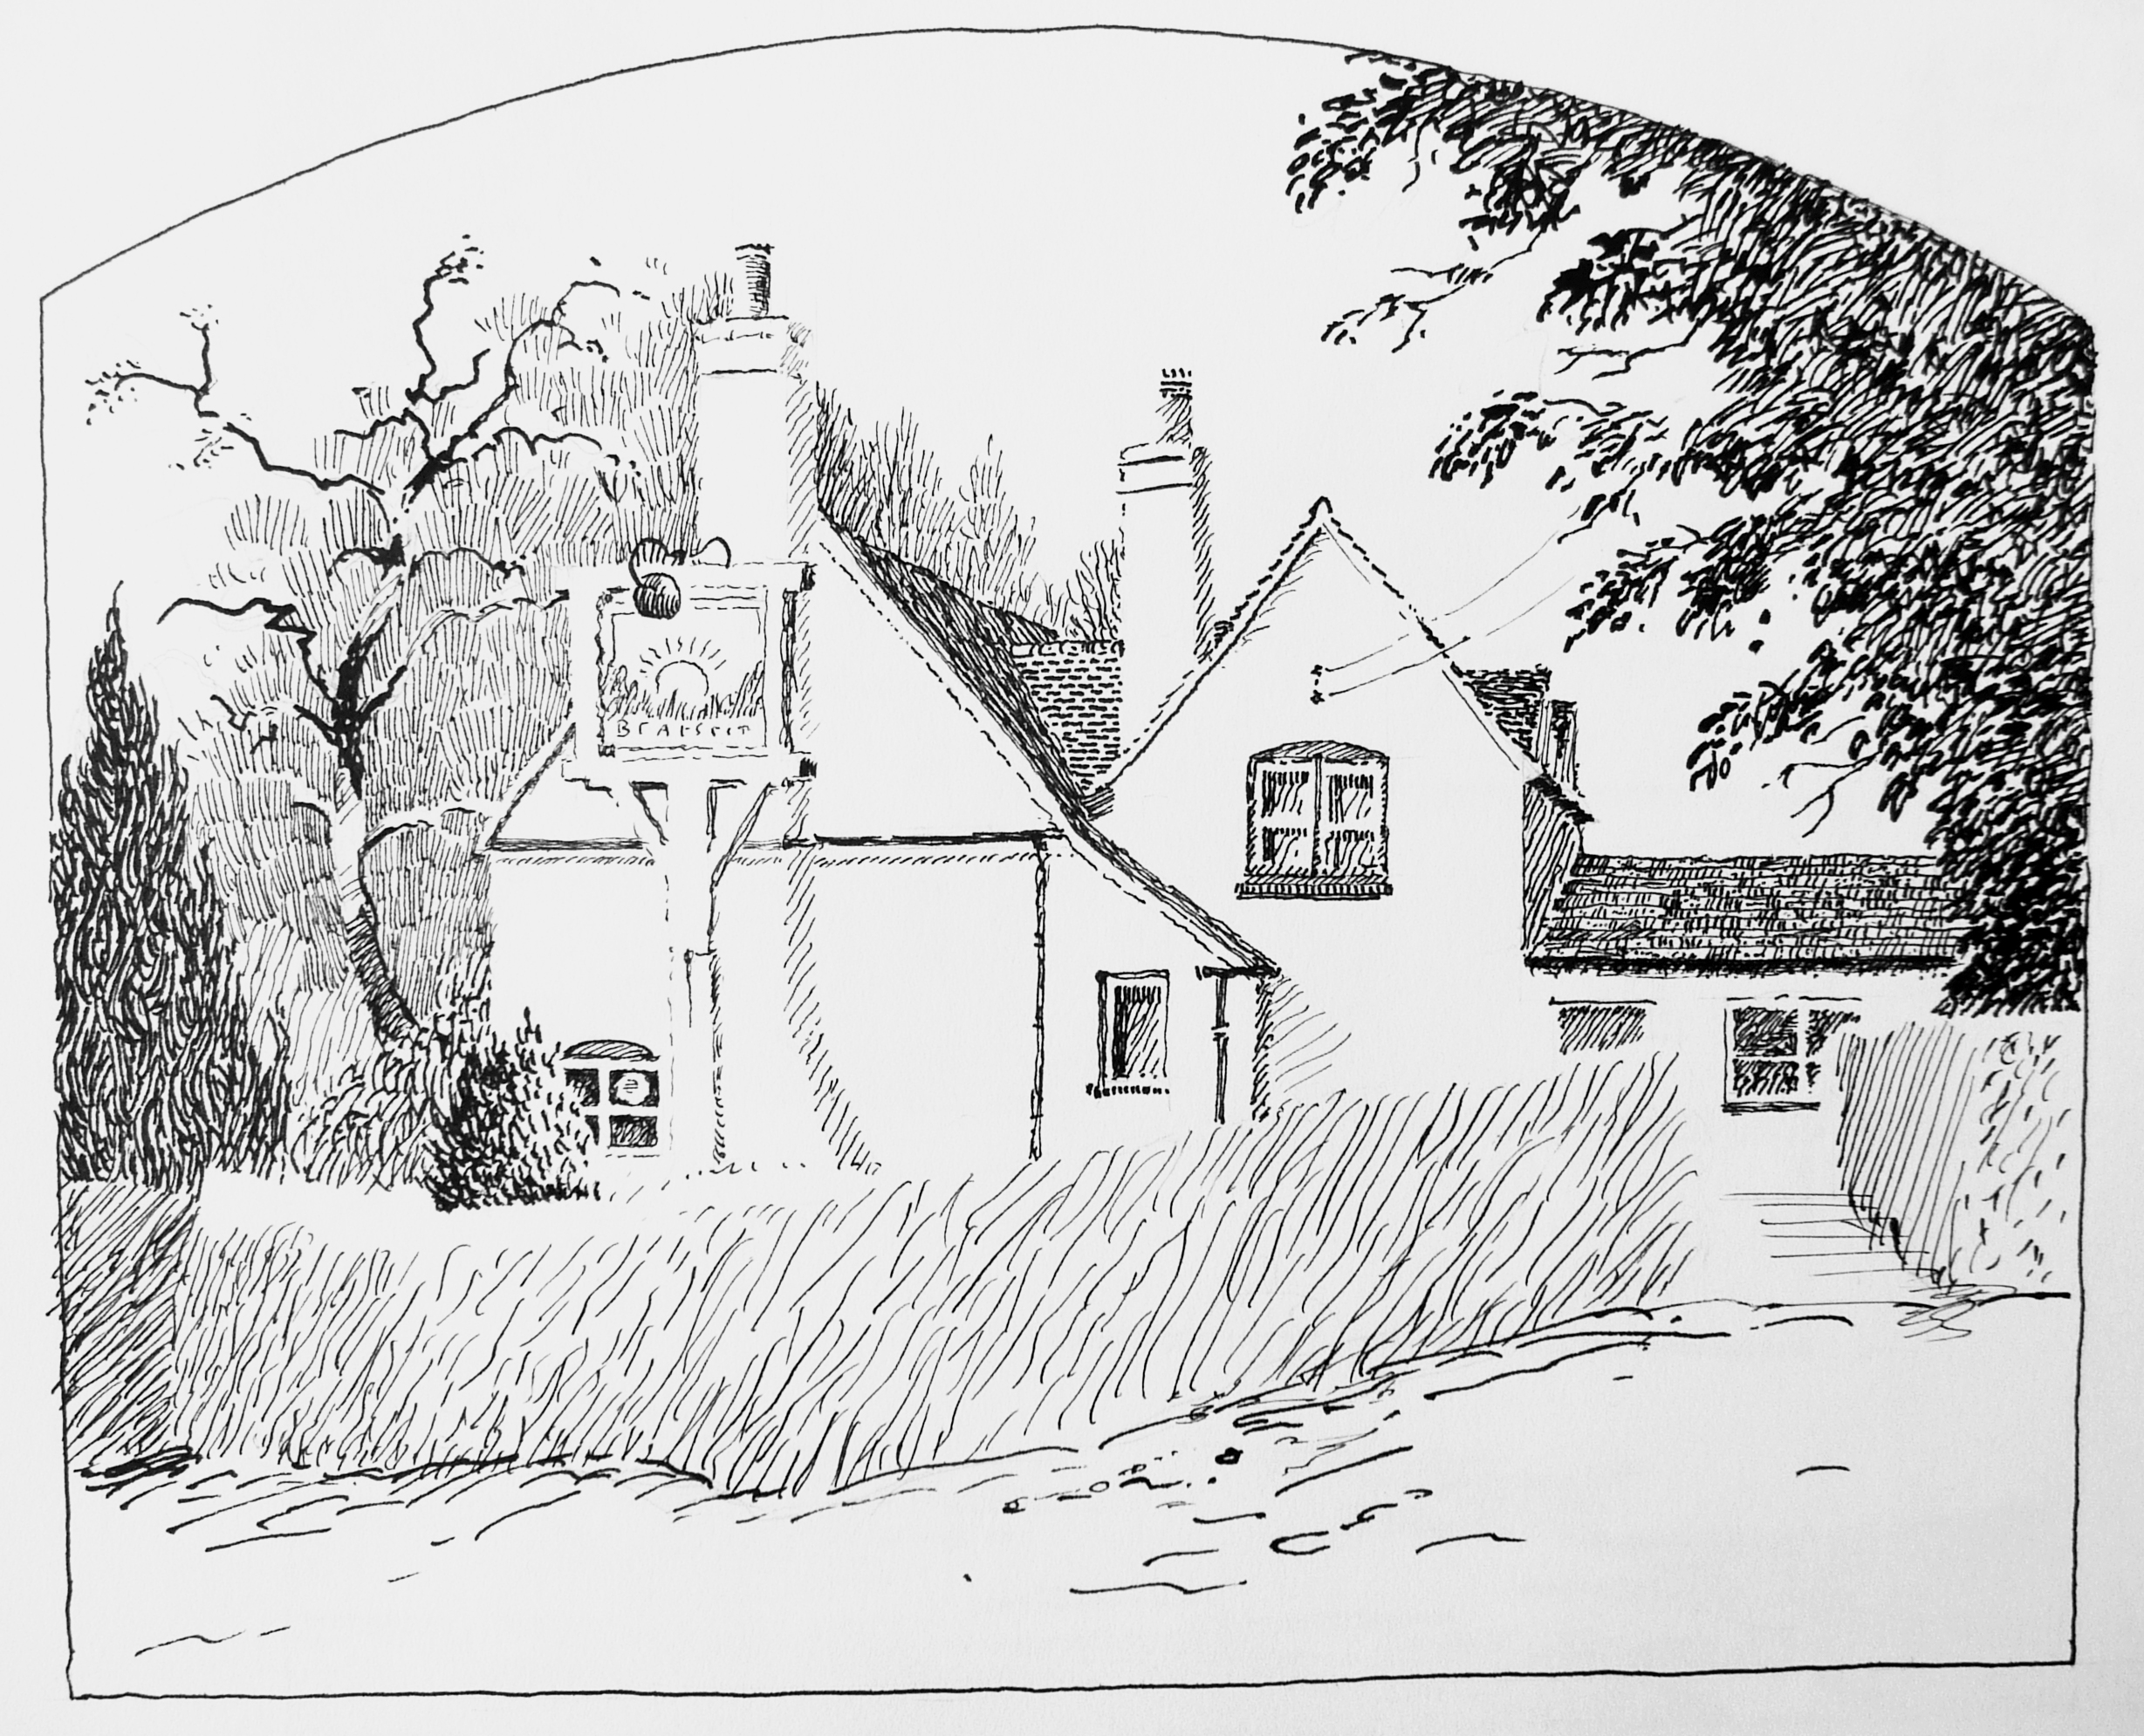 public house pen and ink drawing